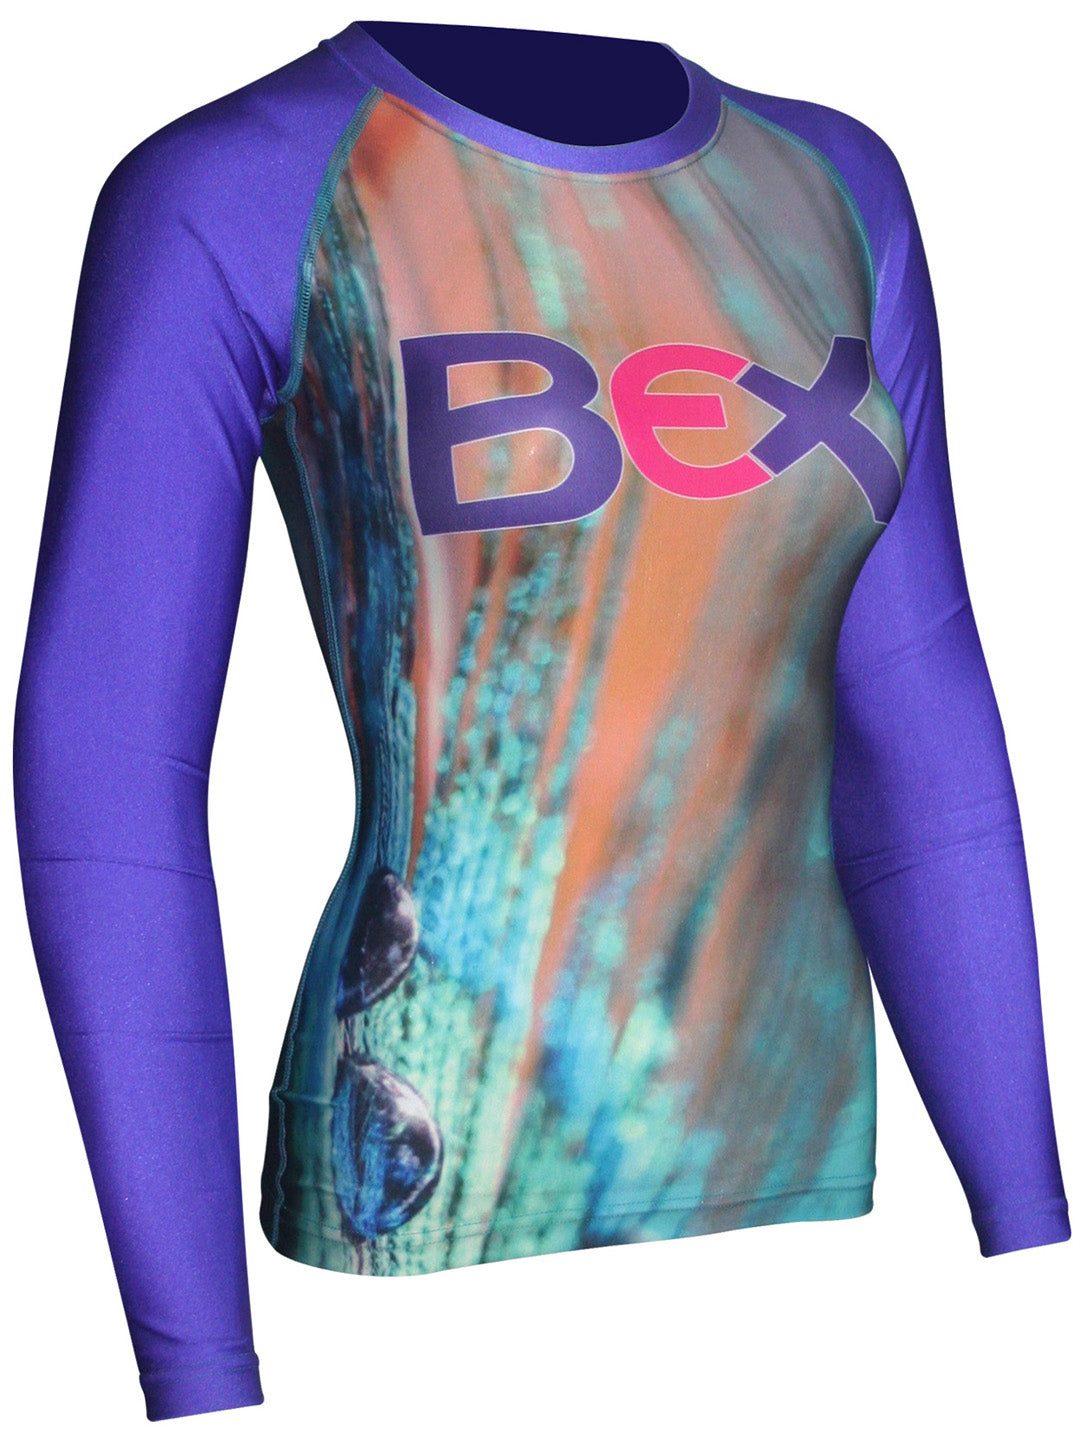 Performance-Driven Elegance: Women's Compression Shirt and Pants Set for Elevated Fitness